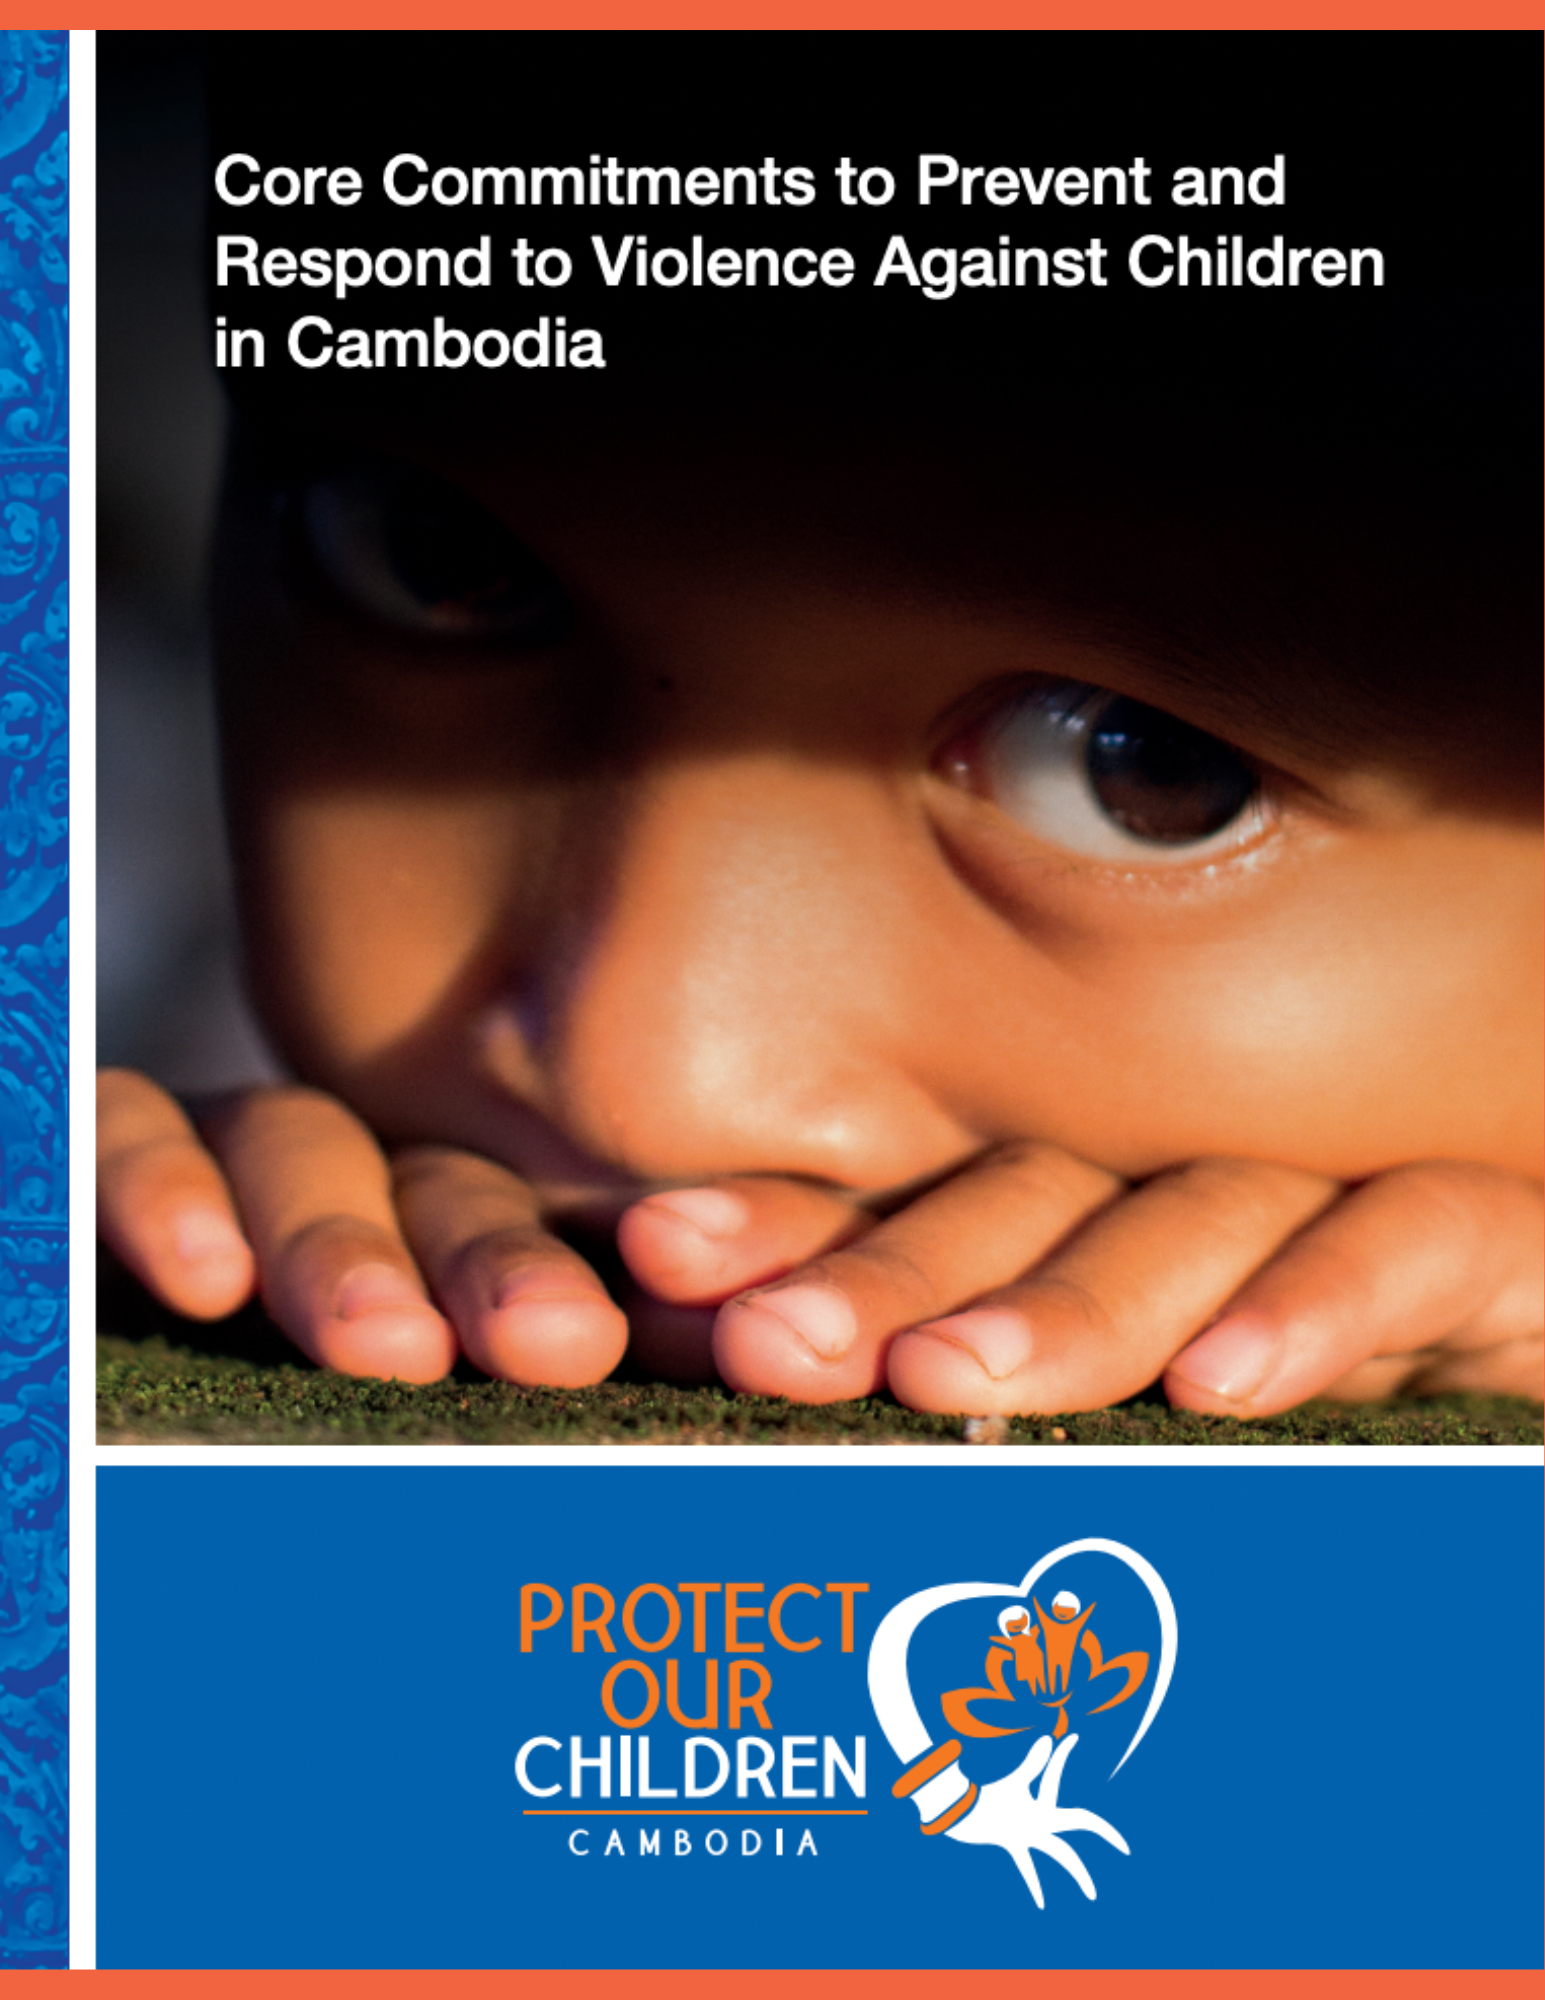 Core Commitments to Prevent and Respond to Violence Against Children in Cambodia